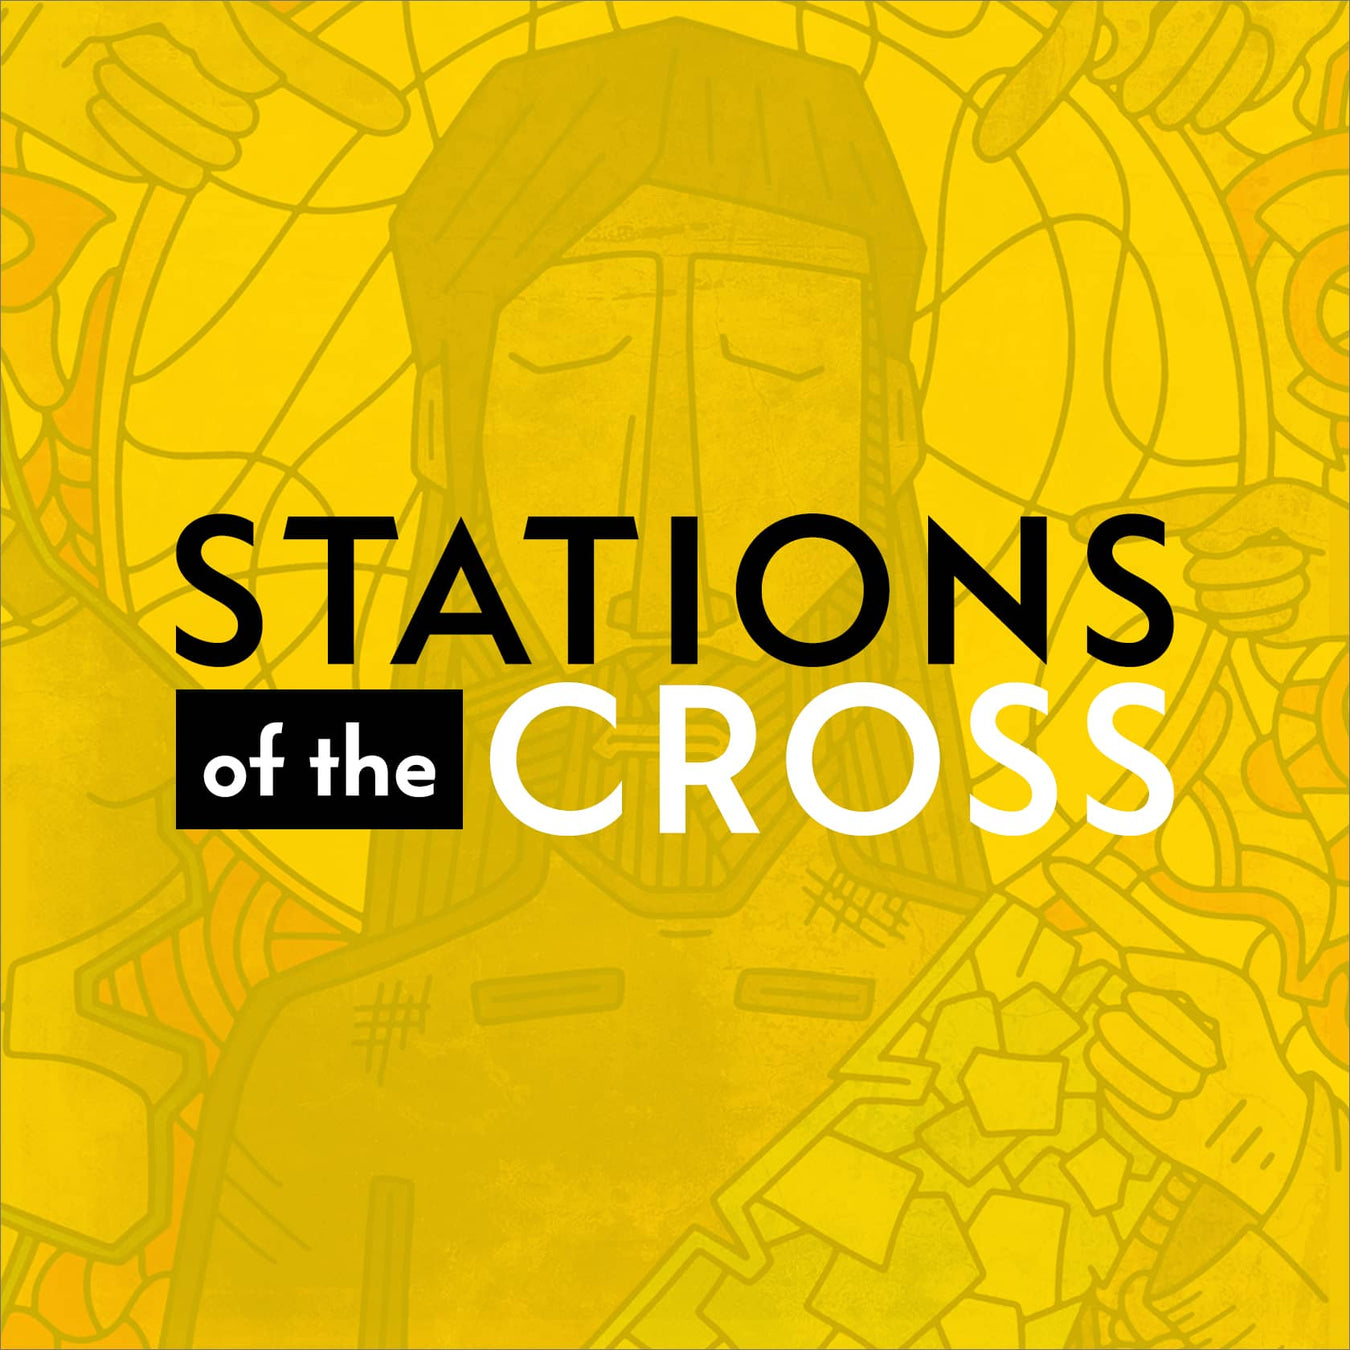 Stations of the Cross Resources